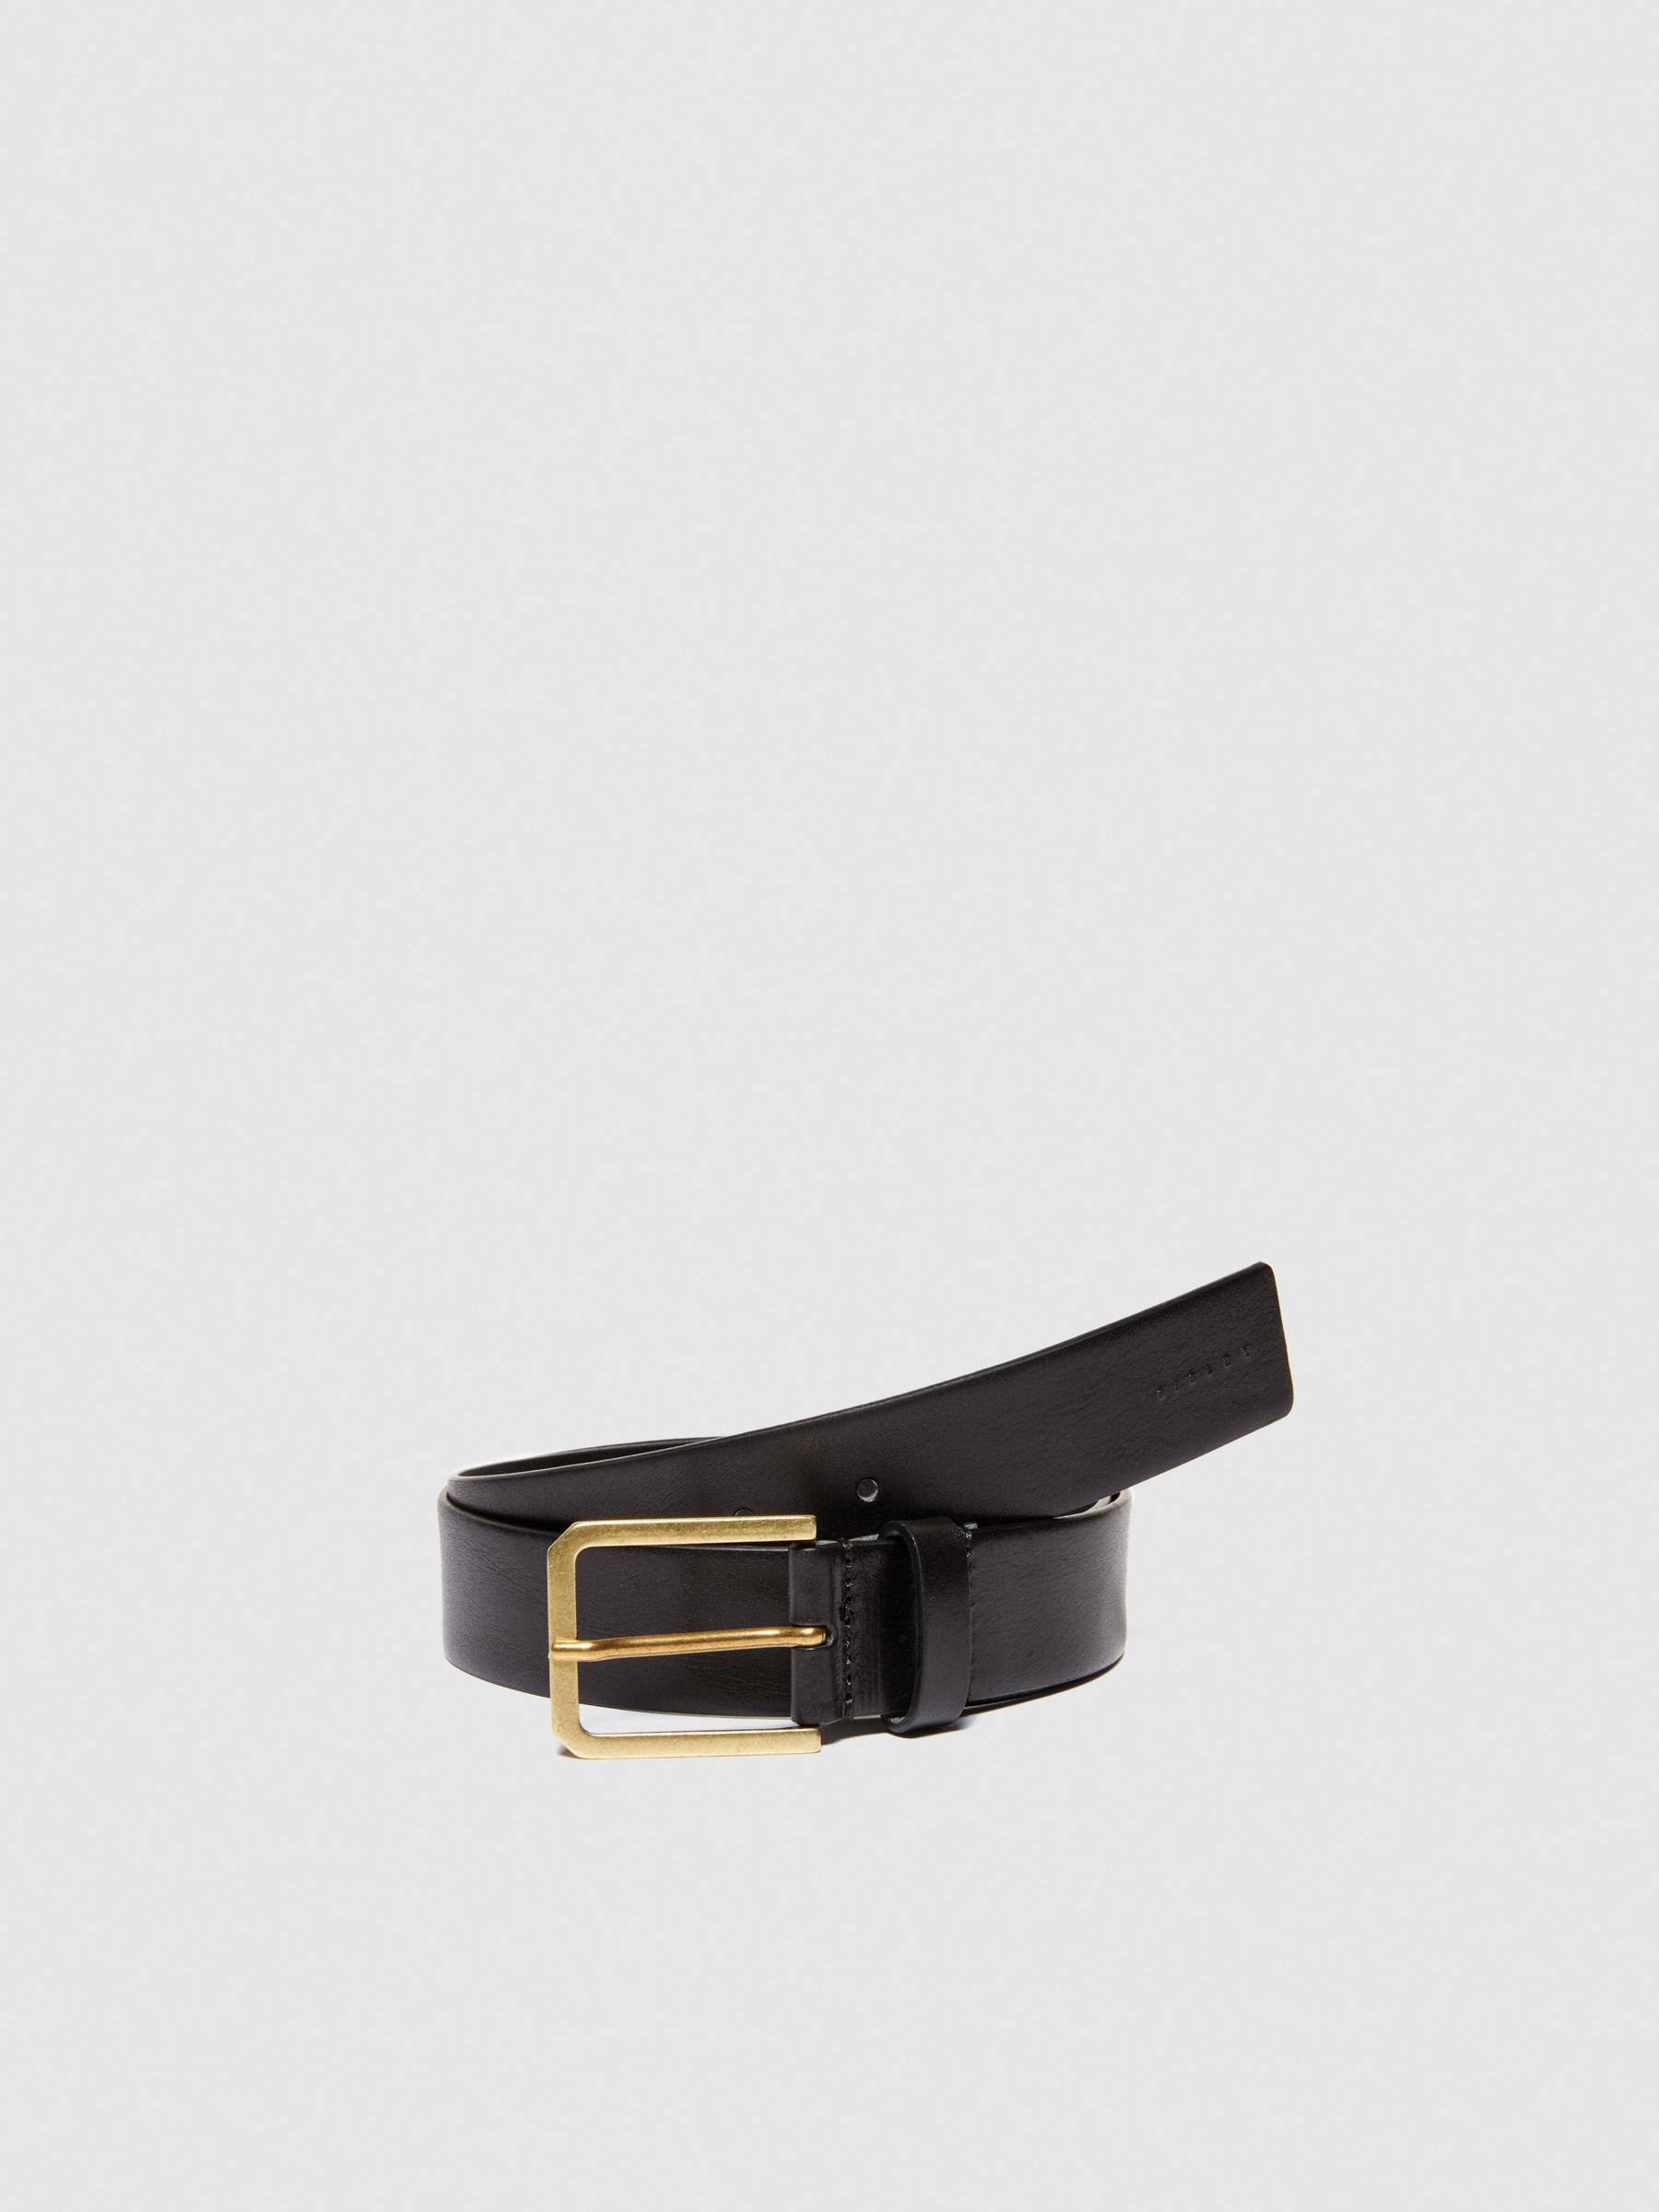 Sisley - Belt With Square Buckle, Woman, Black, Size: M